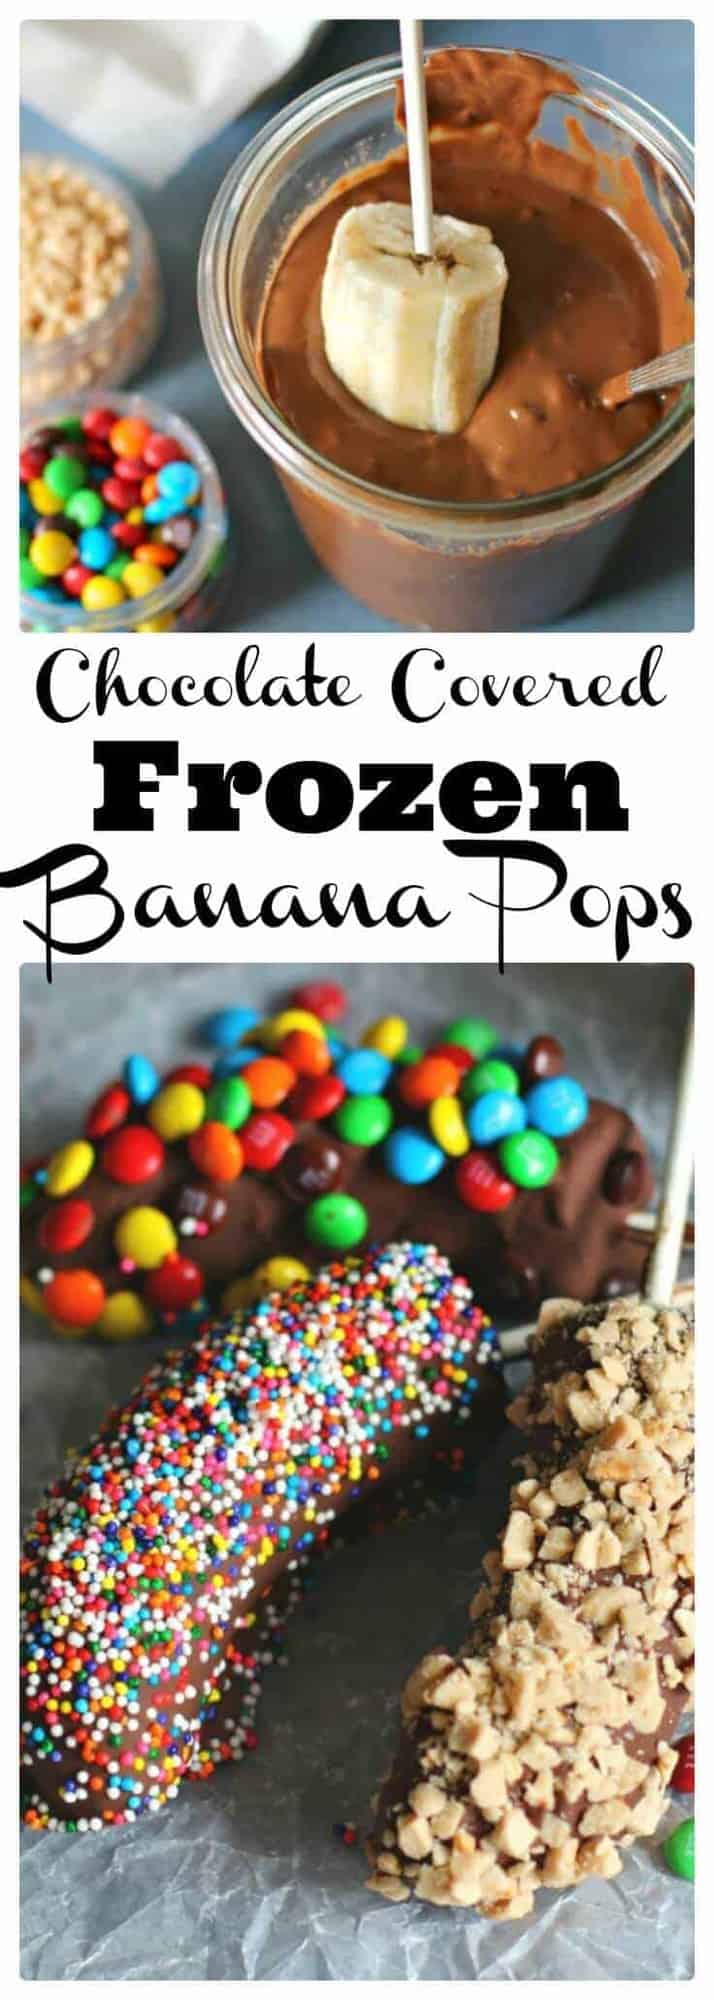 These Frozen Chocolate Dipped Bananas will not only be a fun activity to do with your kids, but they will be a fresh, healthy treat for their bottomless stomachs! Pick your toppings: M&M's, sprinkles, nuts, coconut!